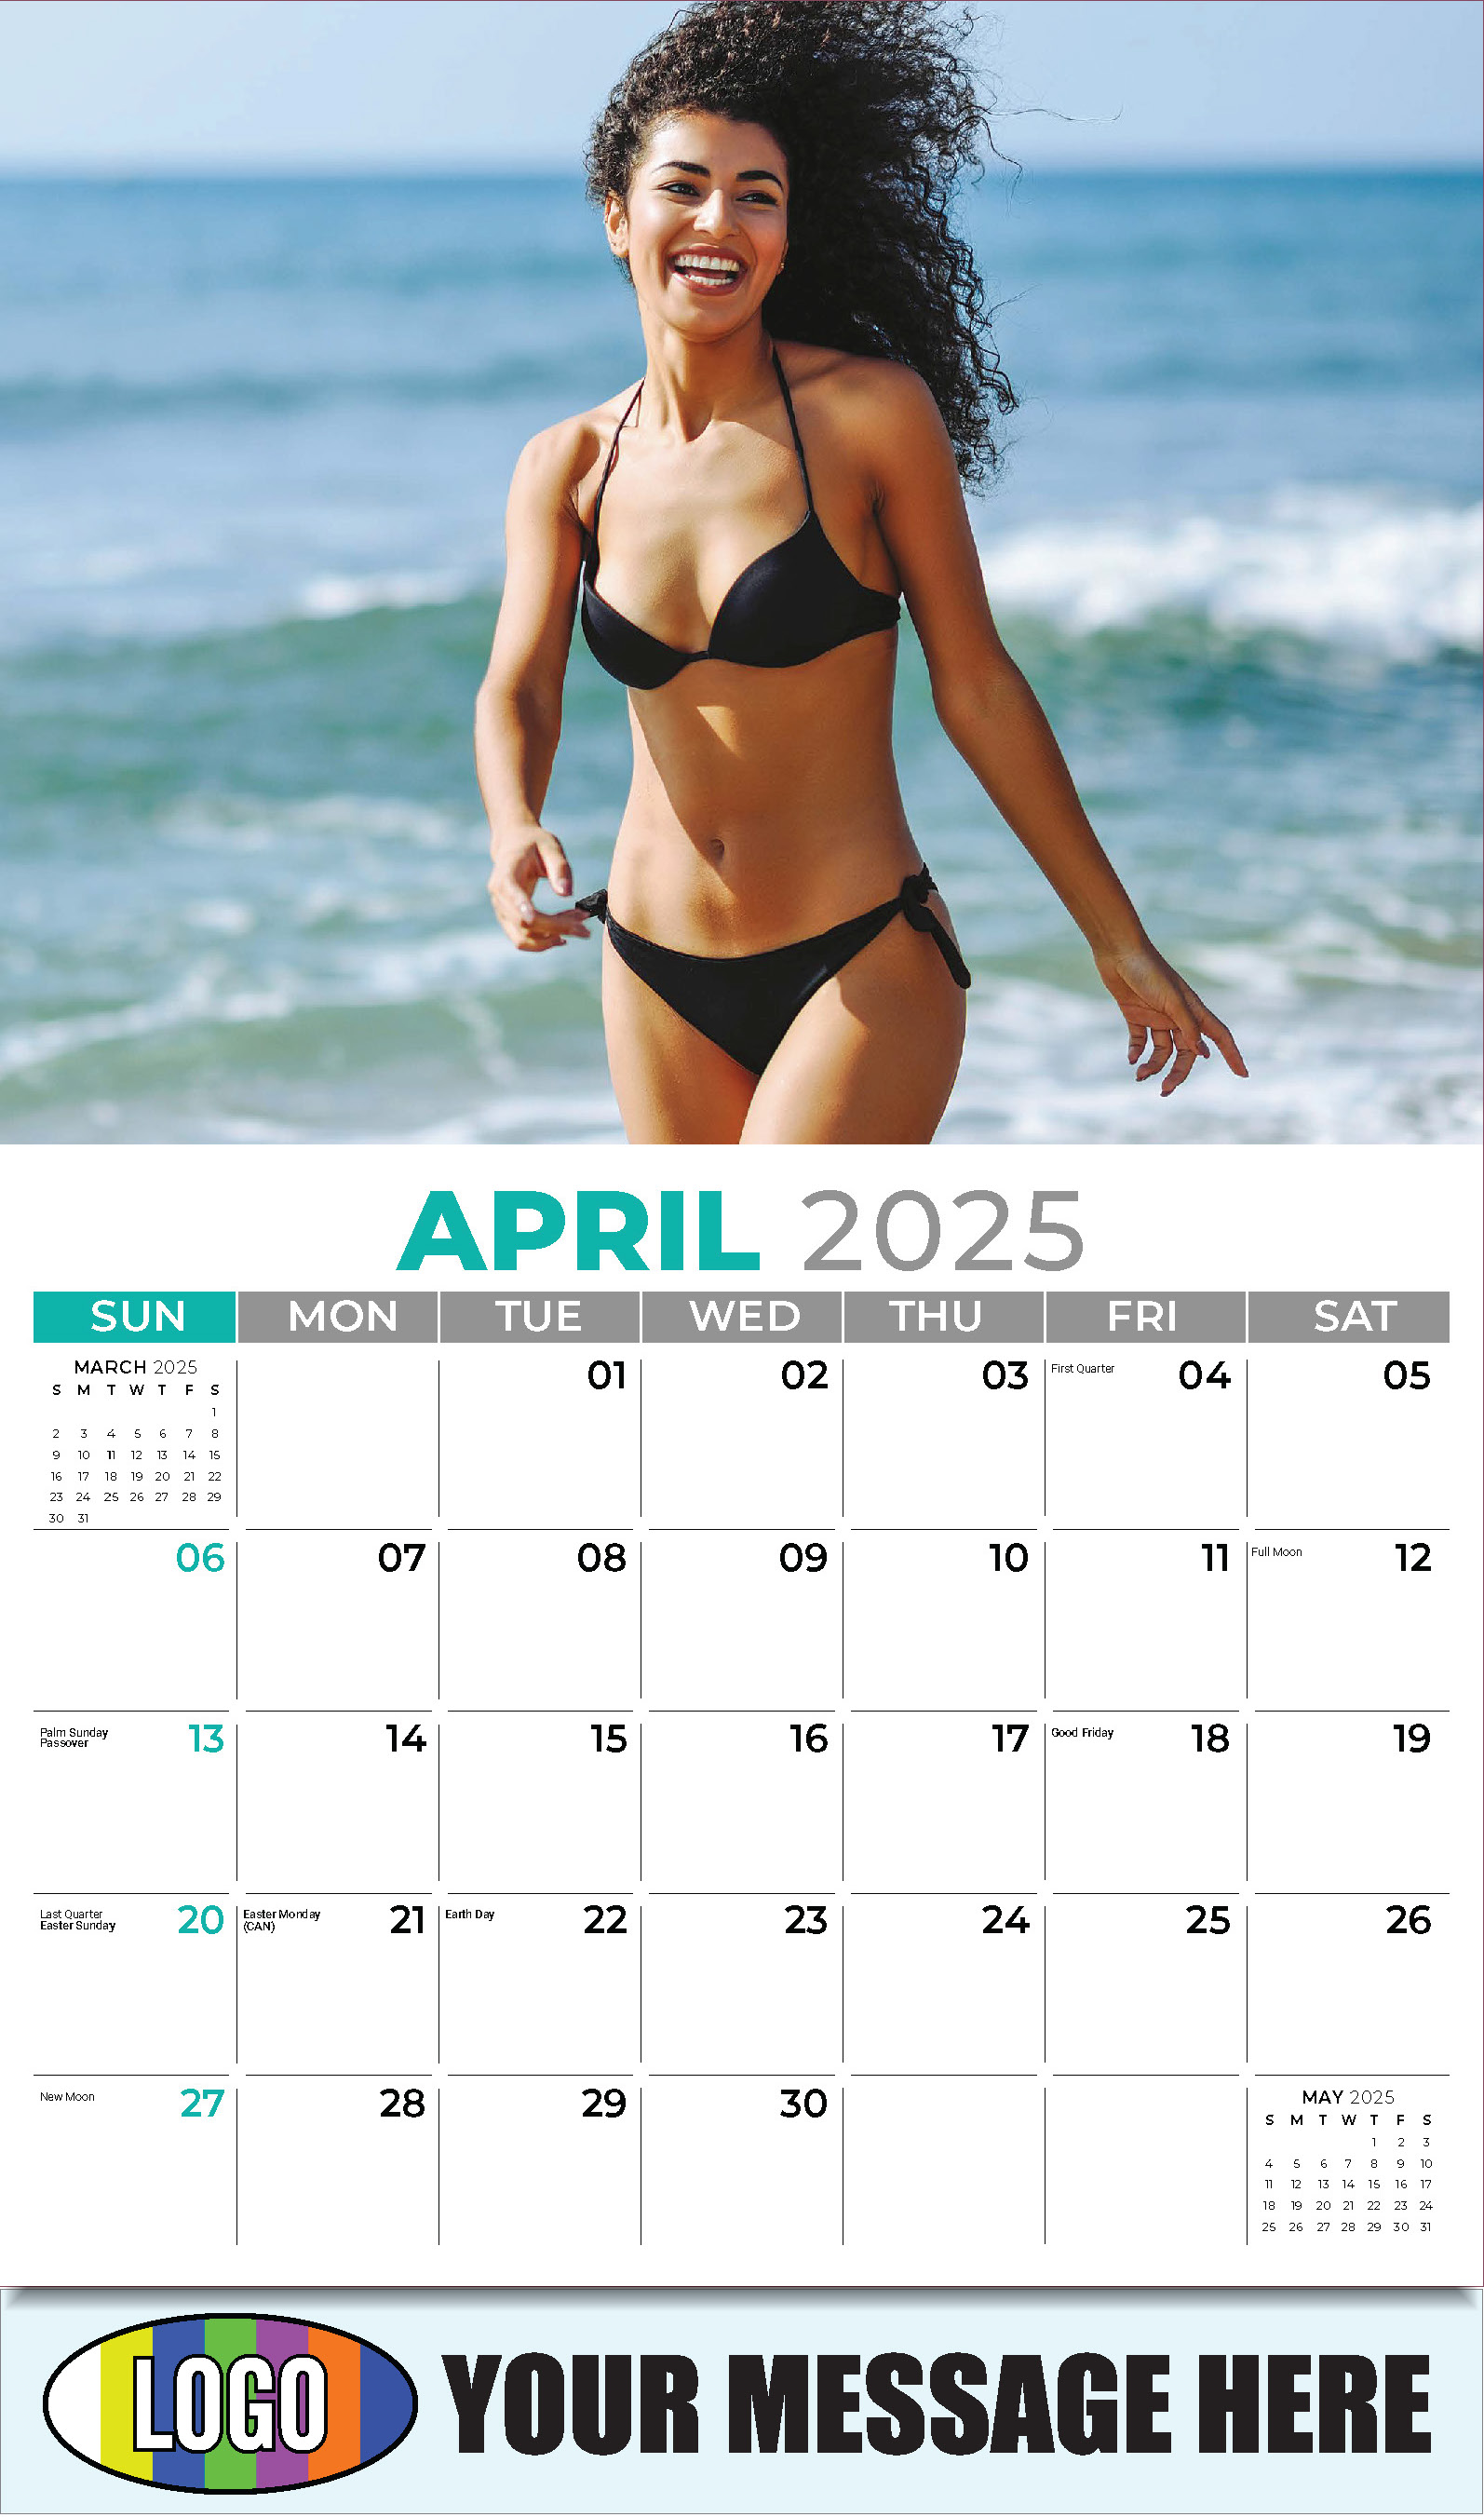 Swimsuits 2025 Business Promotional Wall Calendar - April